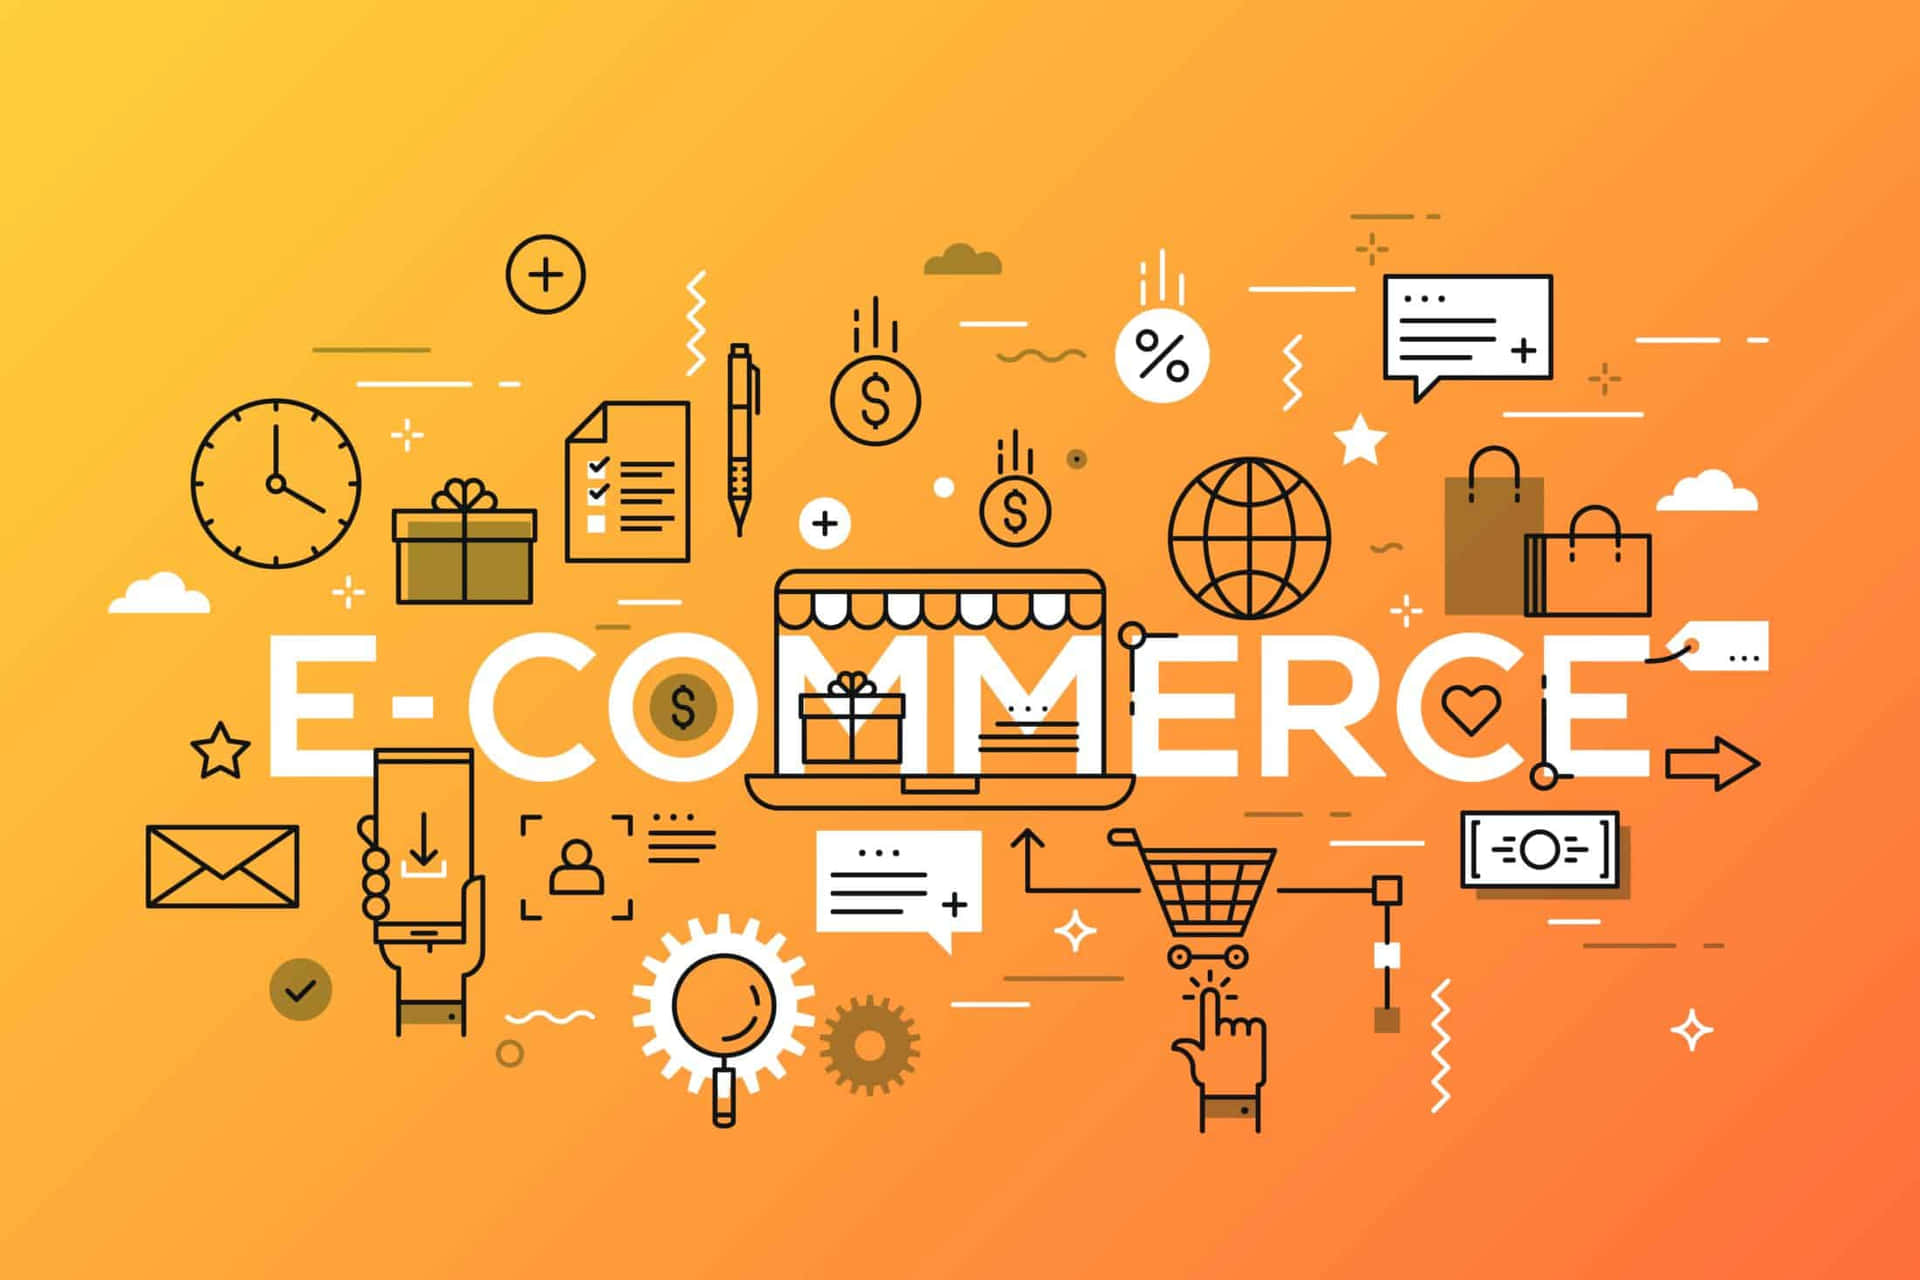 Harness the power of E-commerce to reach your customers with ease